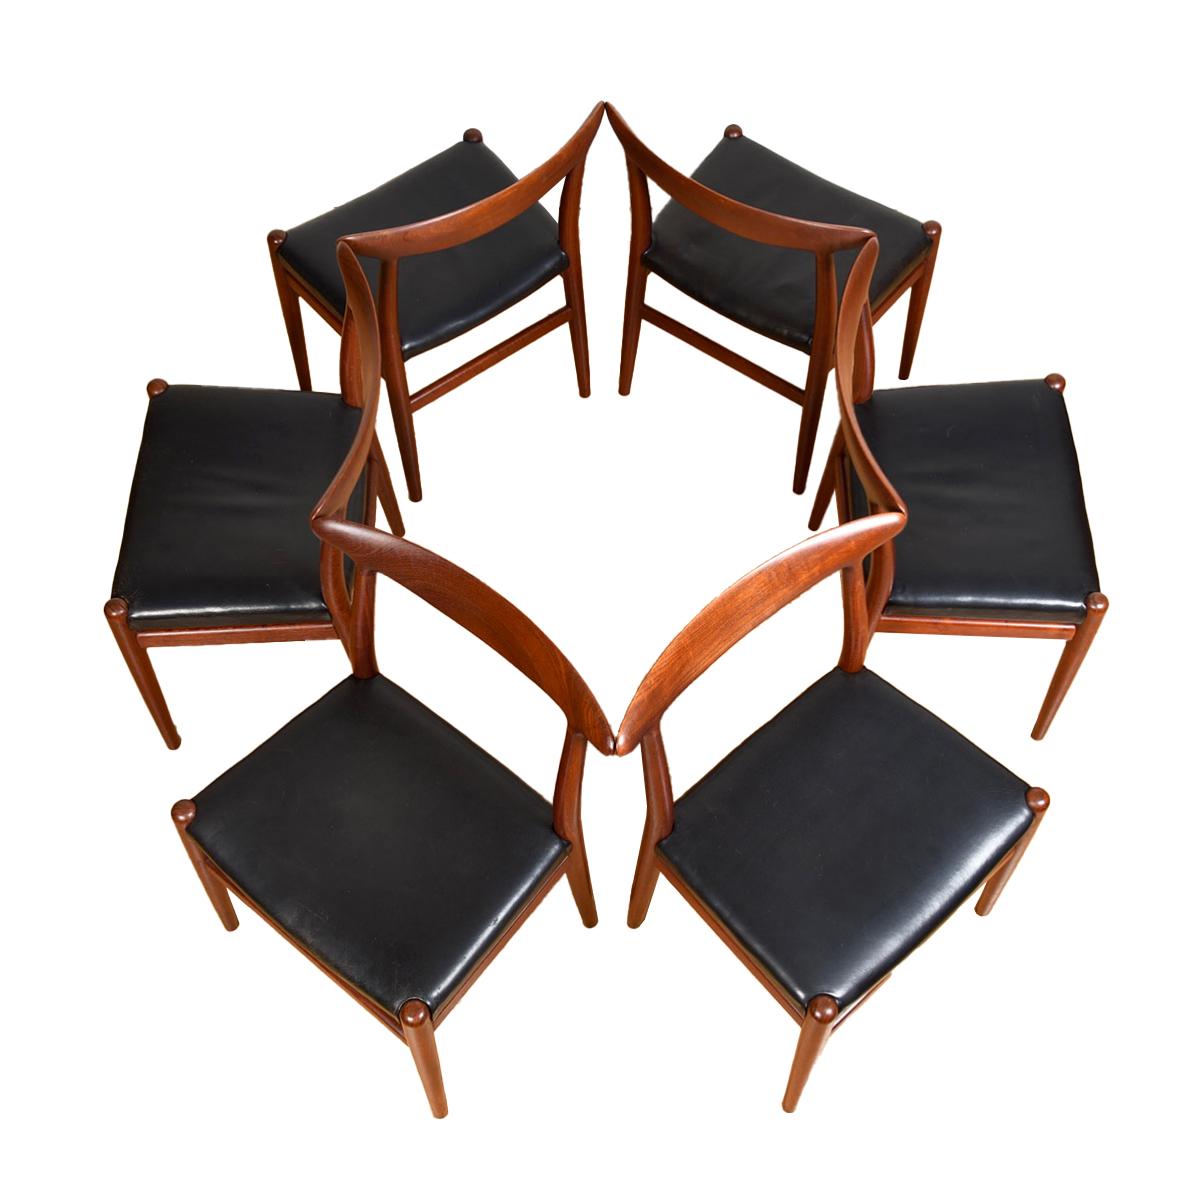 Solid teak sculpted backrests define these chairs — in stunning vintage condition.
Original black leather broken-in just right to pair perfectly with the teak’s deep-dark patina!
Designed by Hans Wegner, the iconic midcentury designer and father of